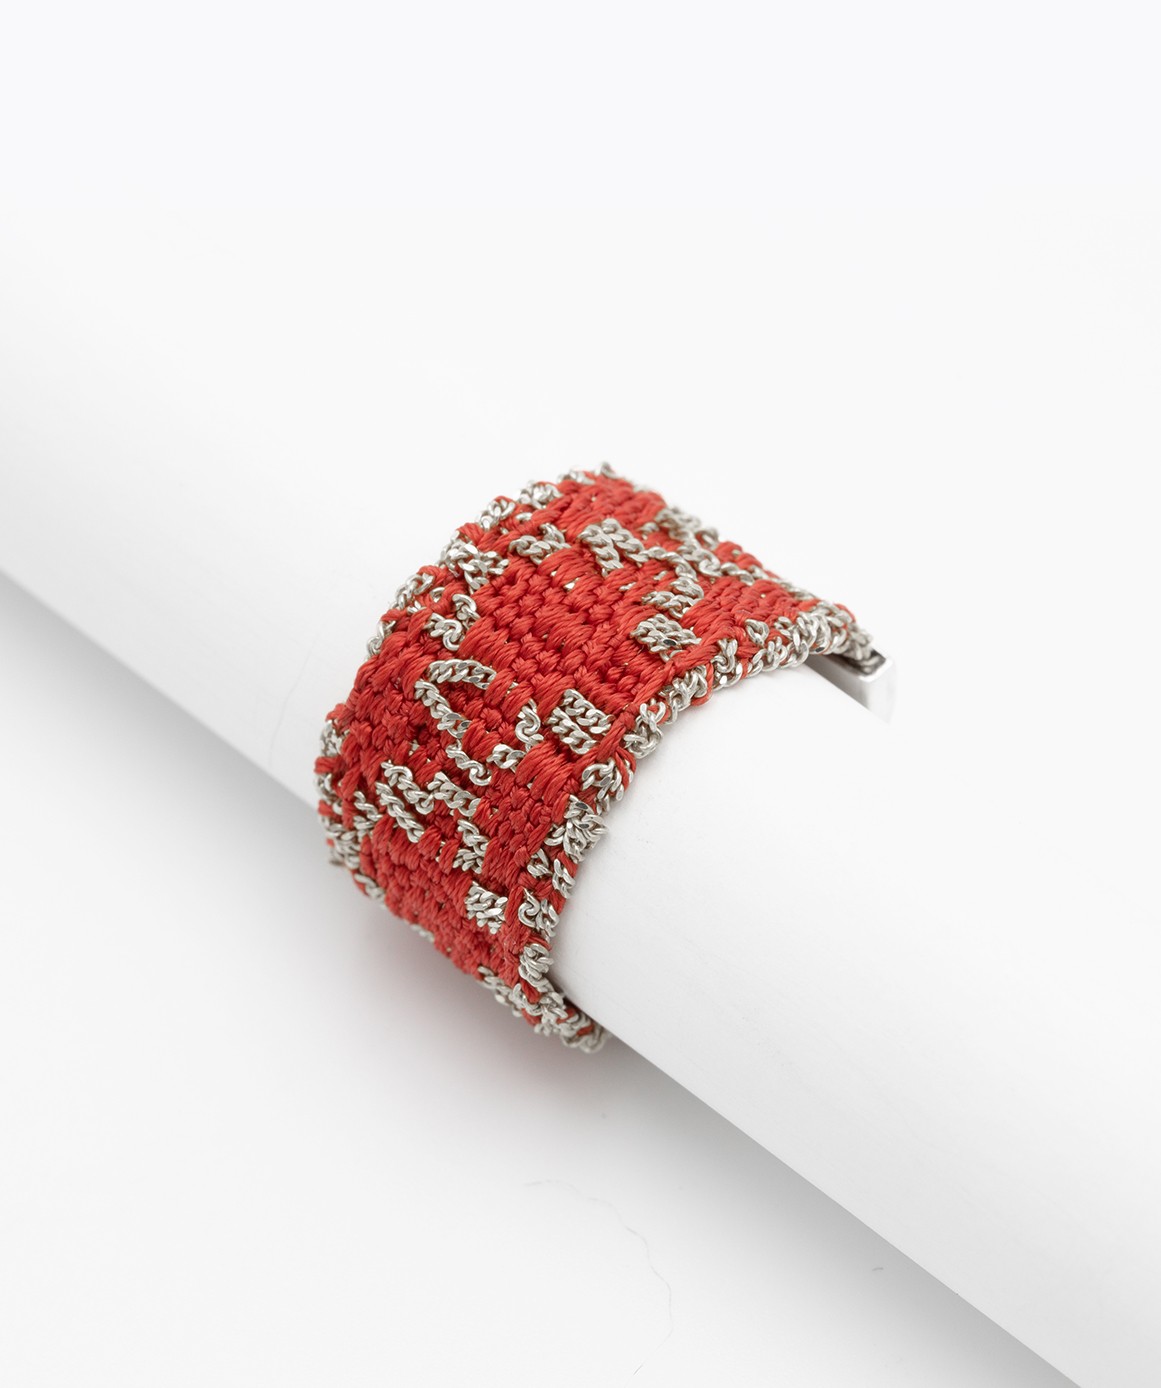 RHOMBUS Ring in Sterling Silver Rhodium plated. Fabric: Red